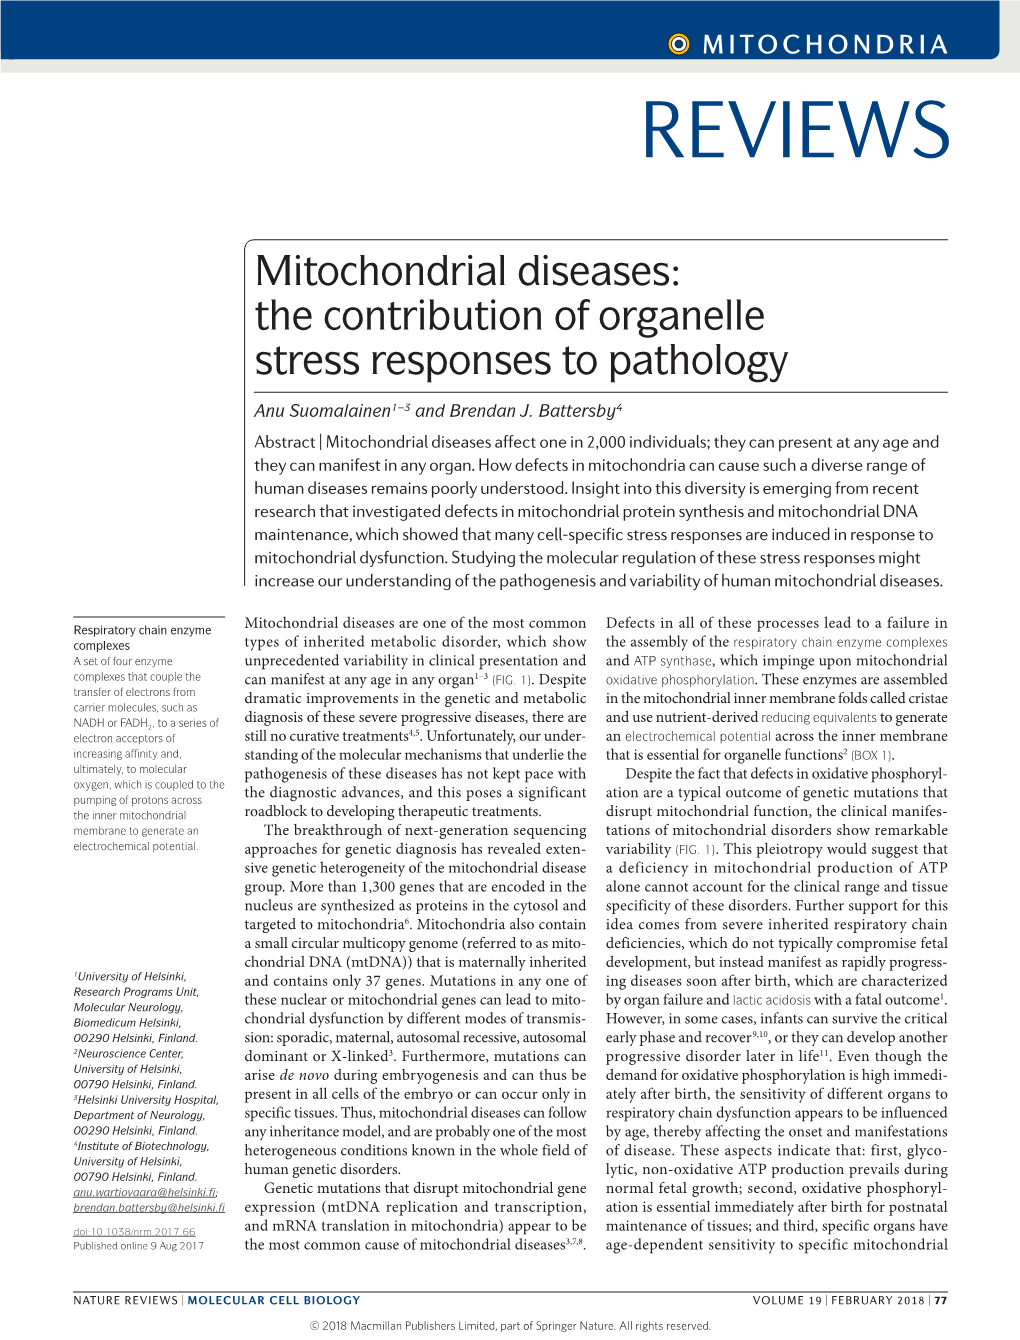 Mitochondrial Diseases: the Contribution of Organelle Stress Responses to Pathology